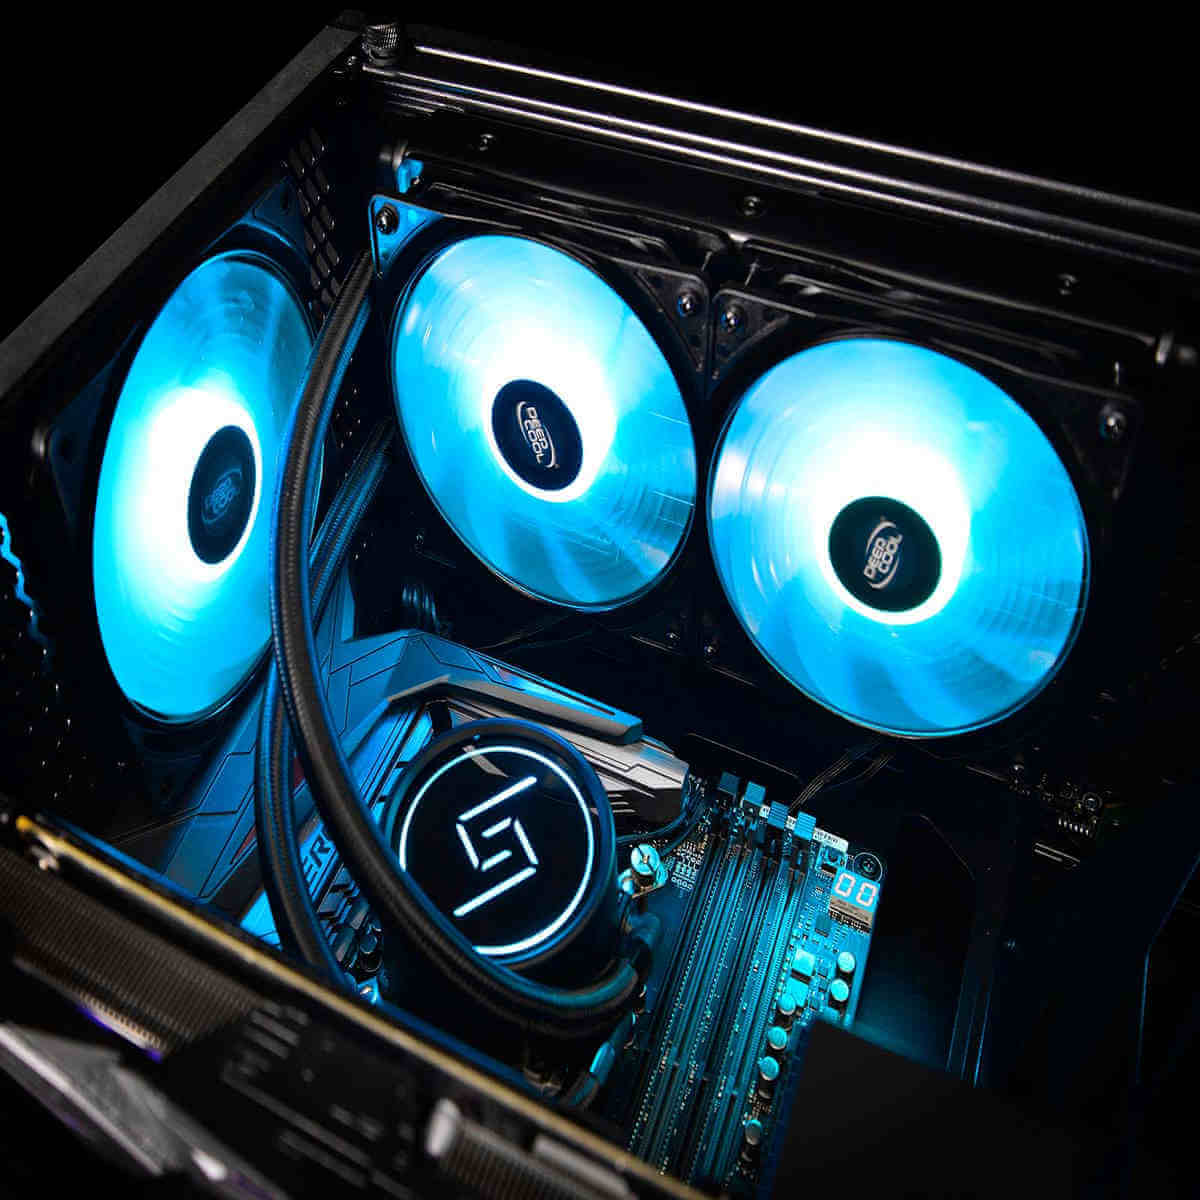 Best AIO Coolers